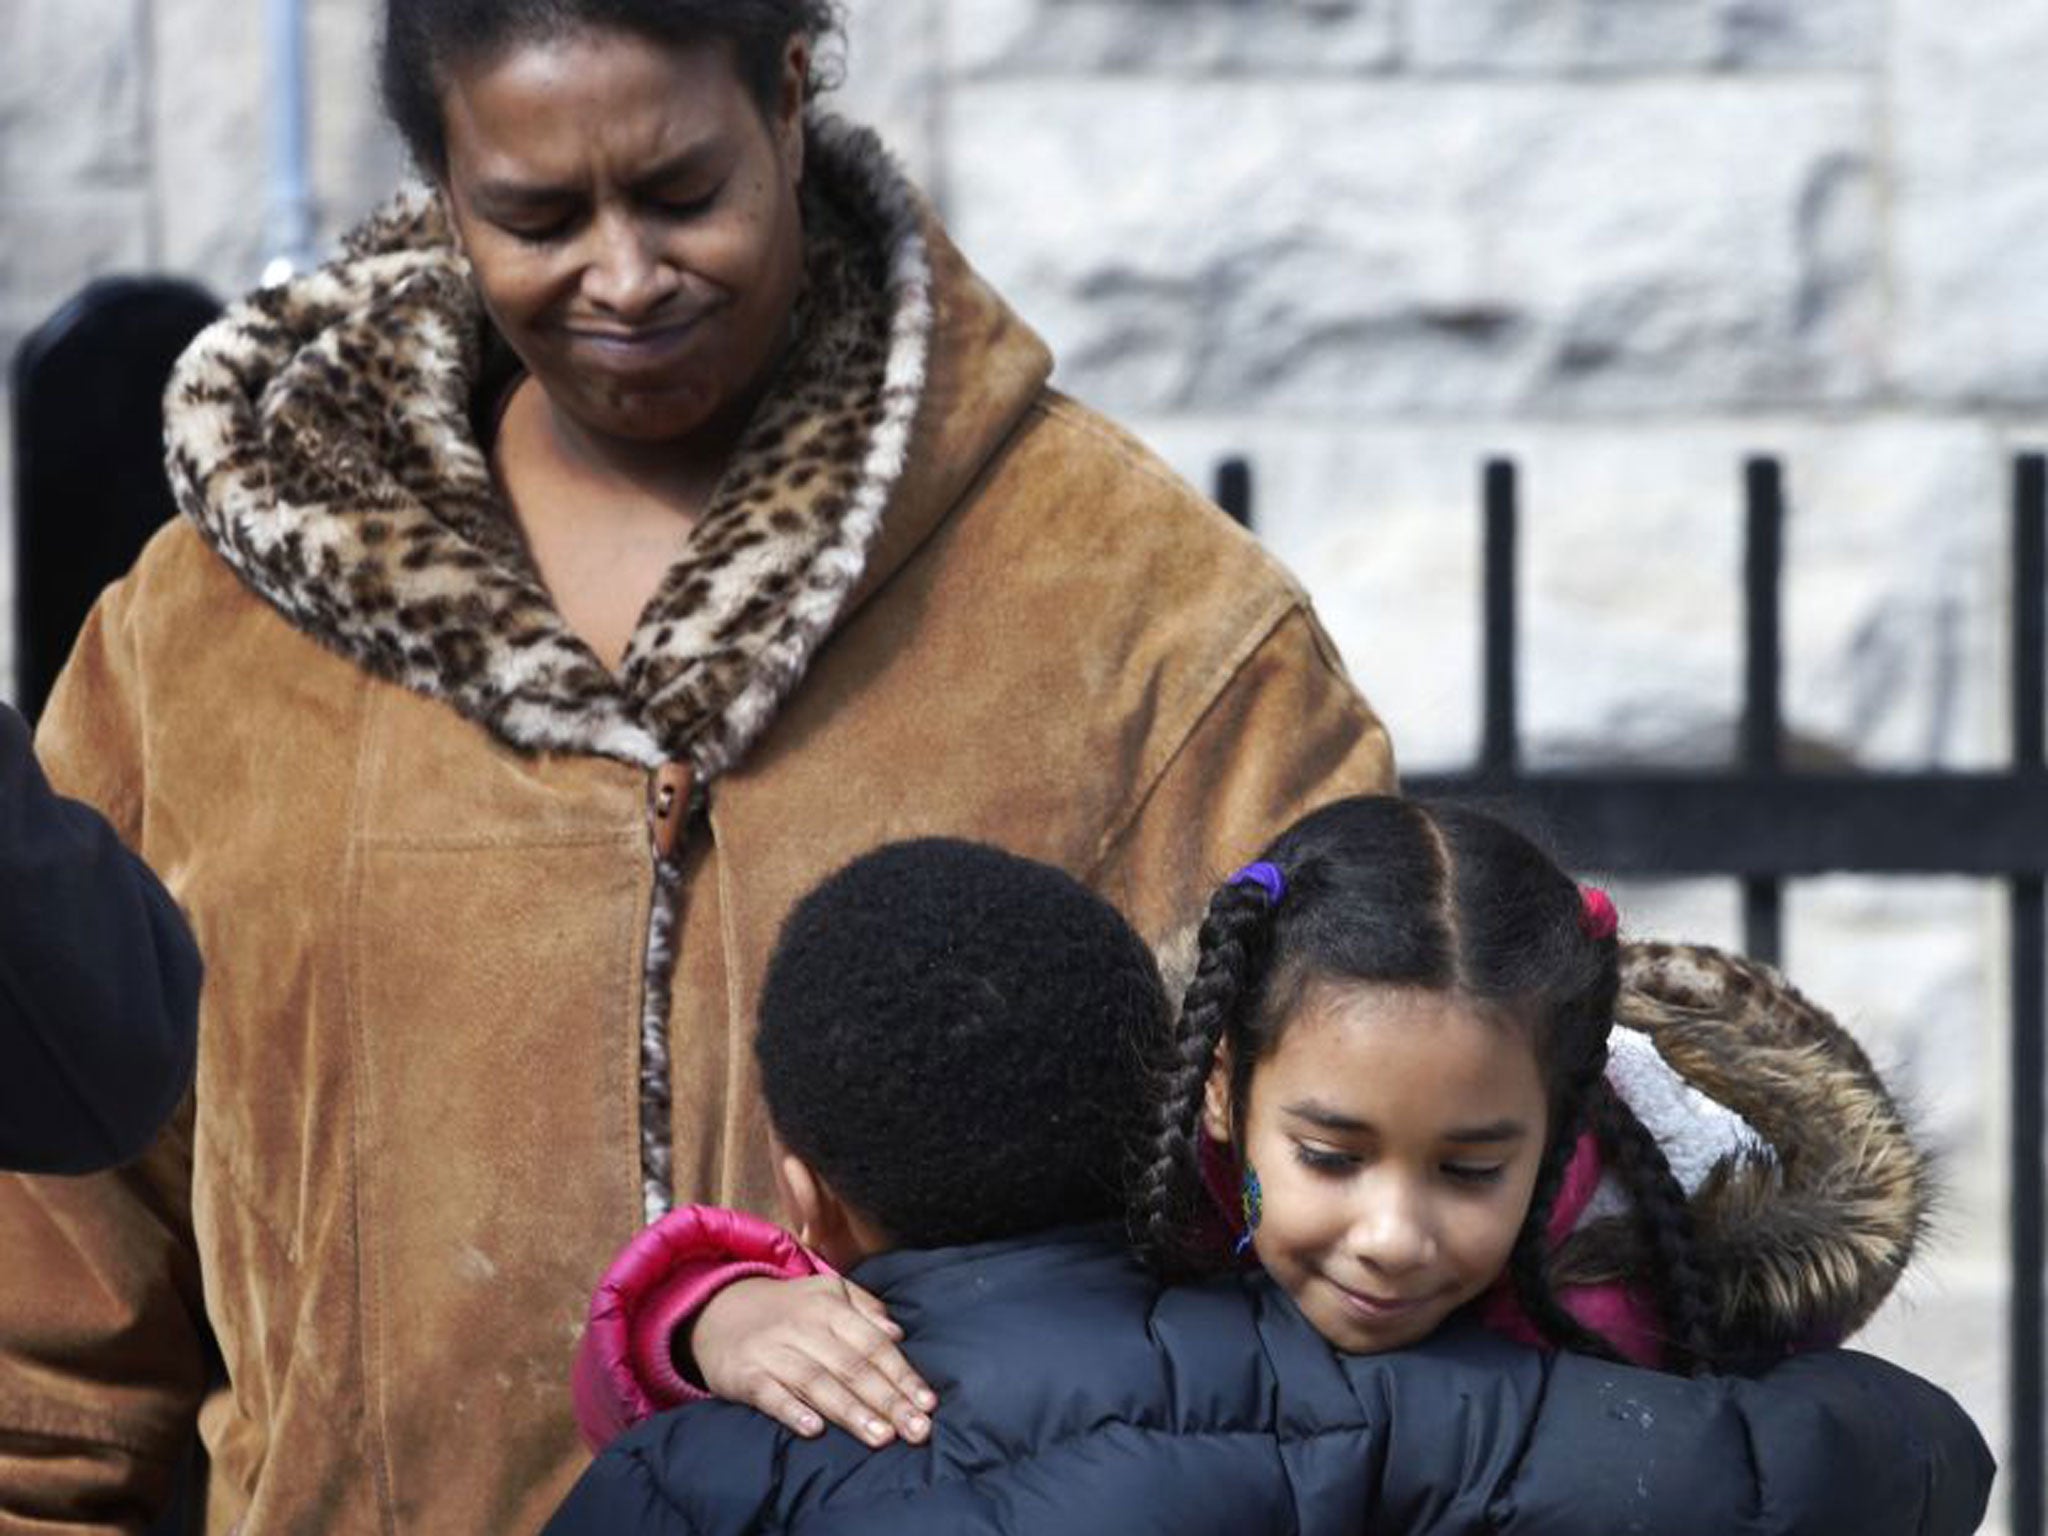 Maria Llanos watches on as her daughter hugs a friend at the soon-to-close Lafayette School in Chicago